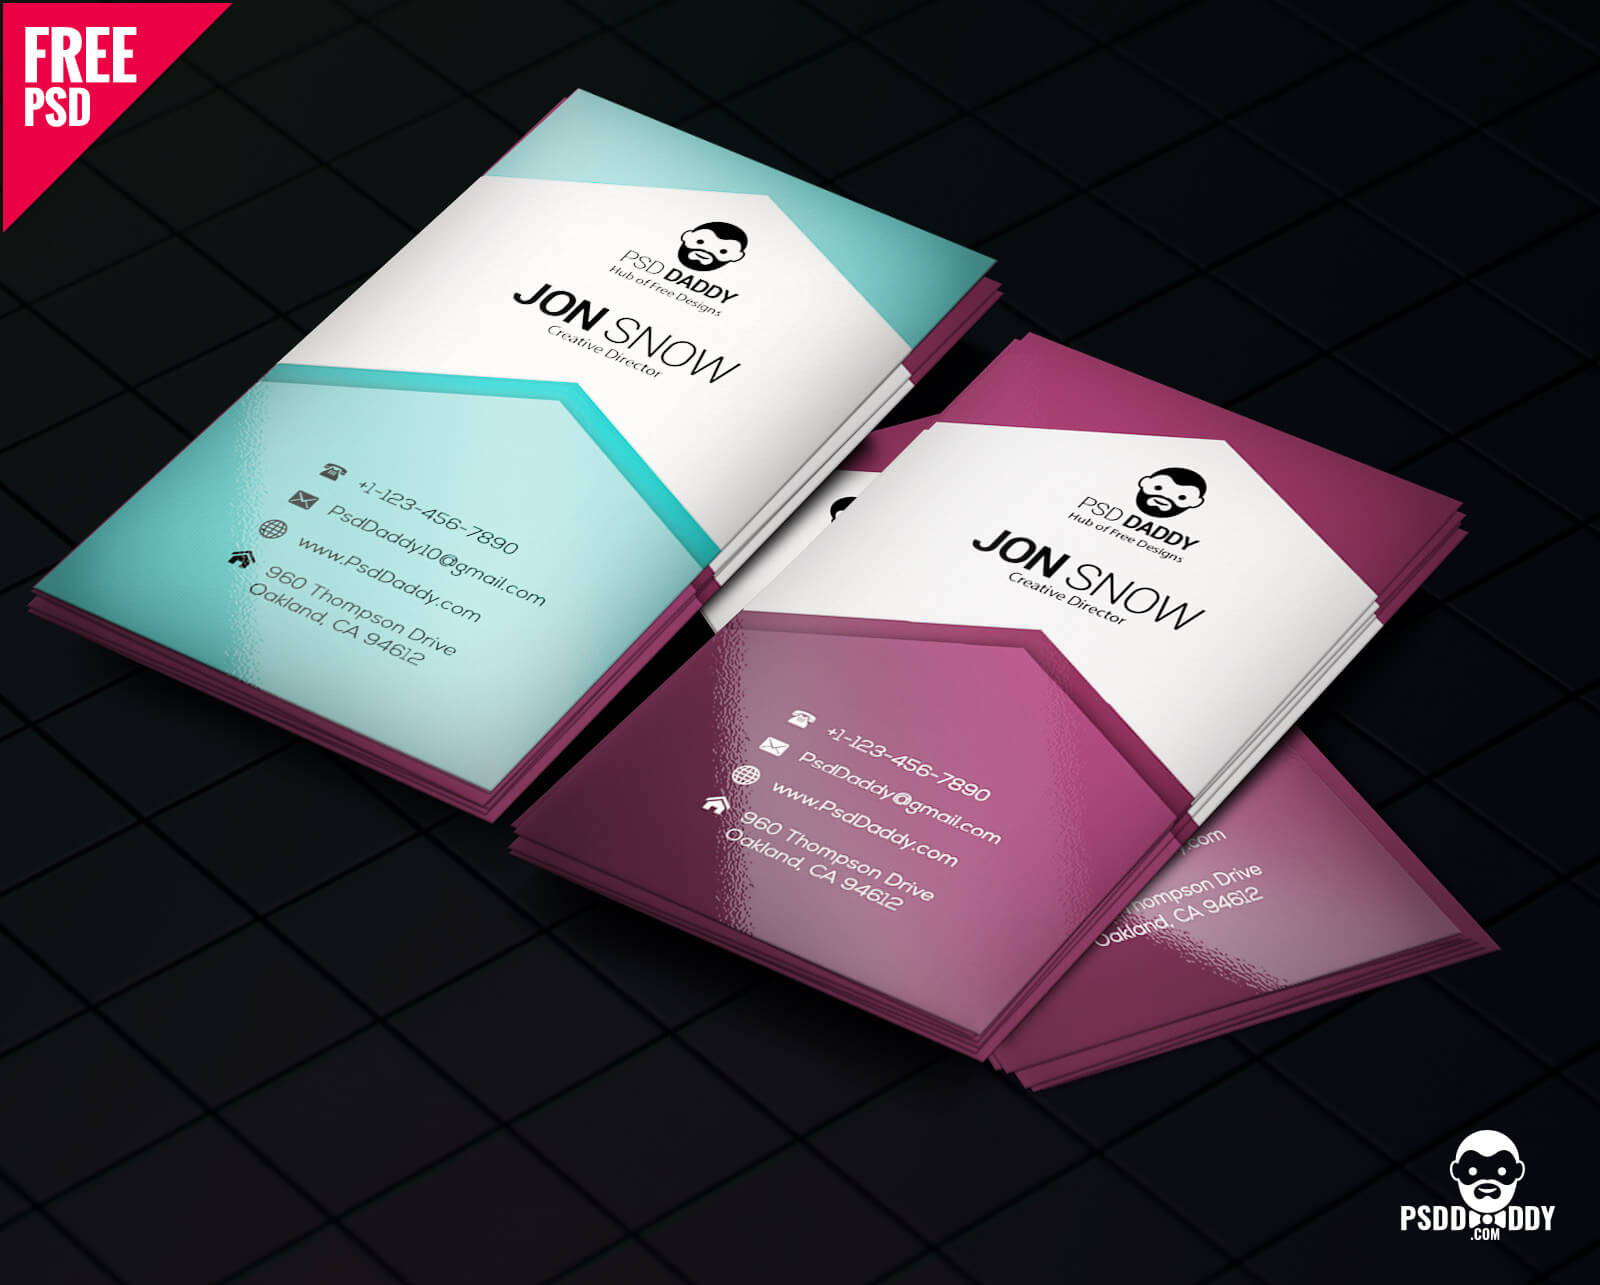 Download]Creative Business Card Psd Free | Psddaddy For Business Card Size Template Psd